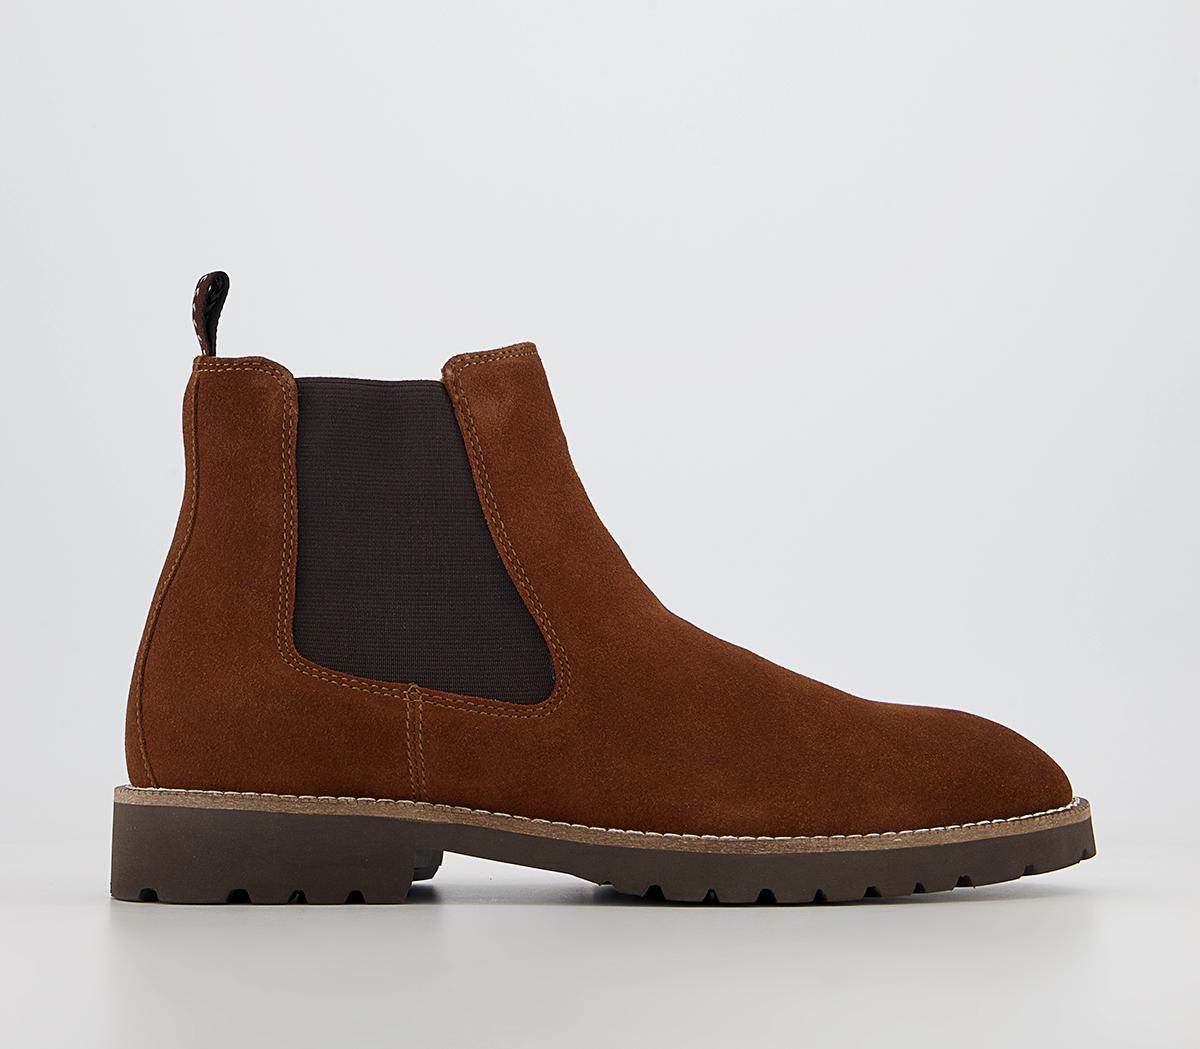 OFFICEBarrow Cleated Sole Chelsea BootsTan Suede